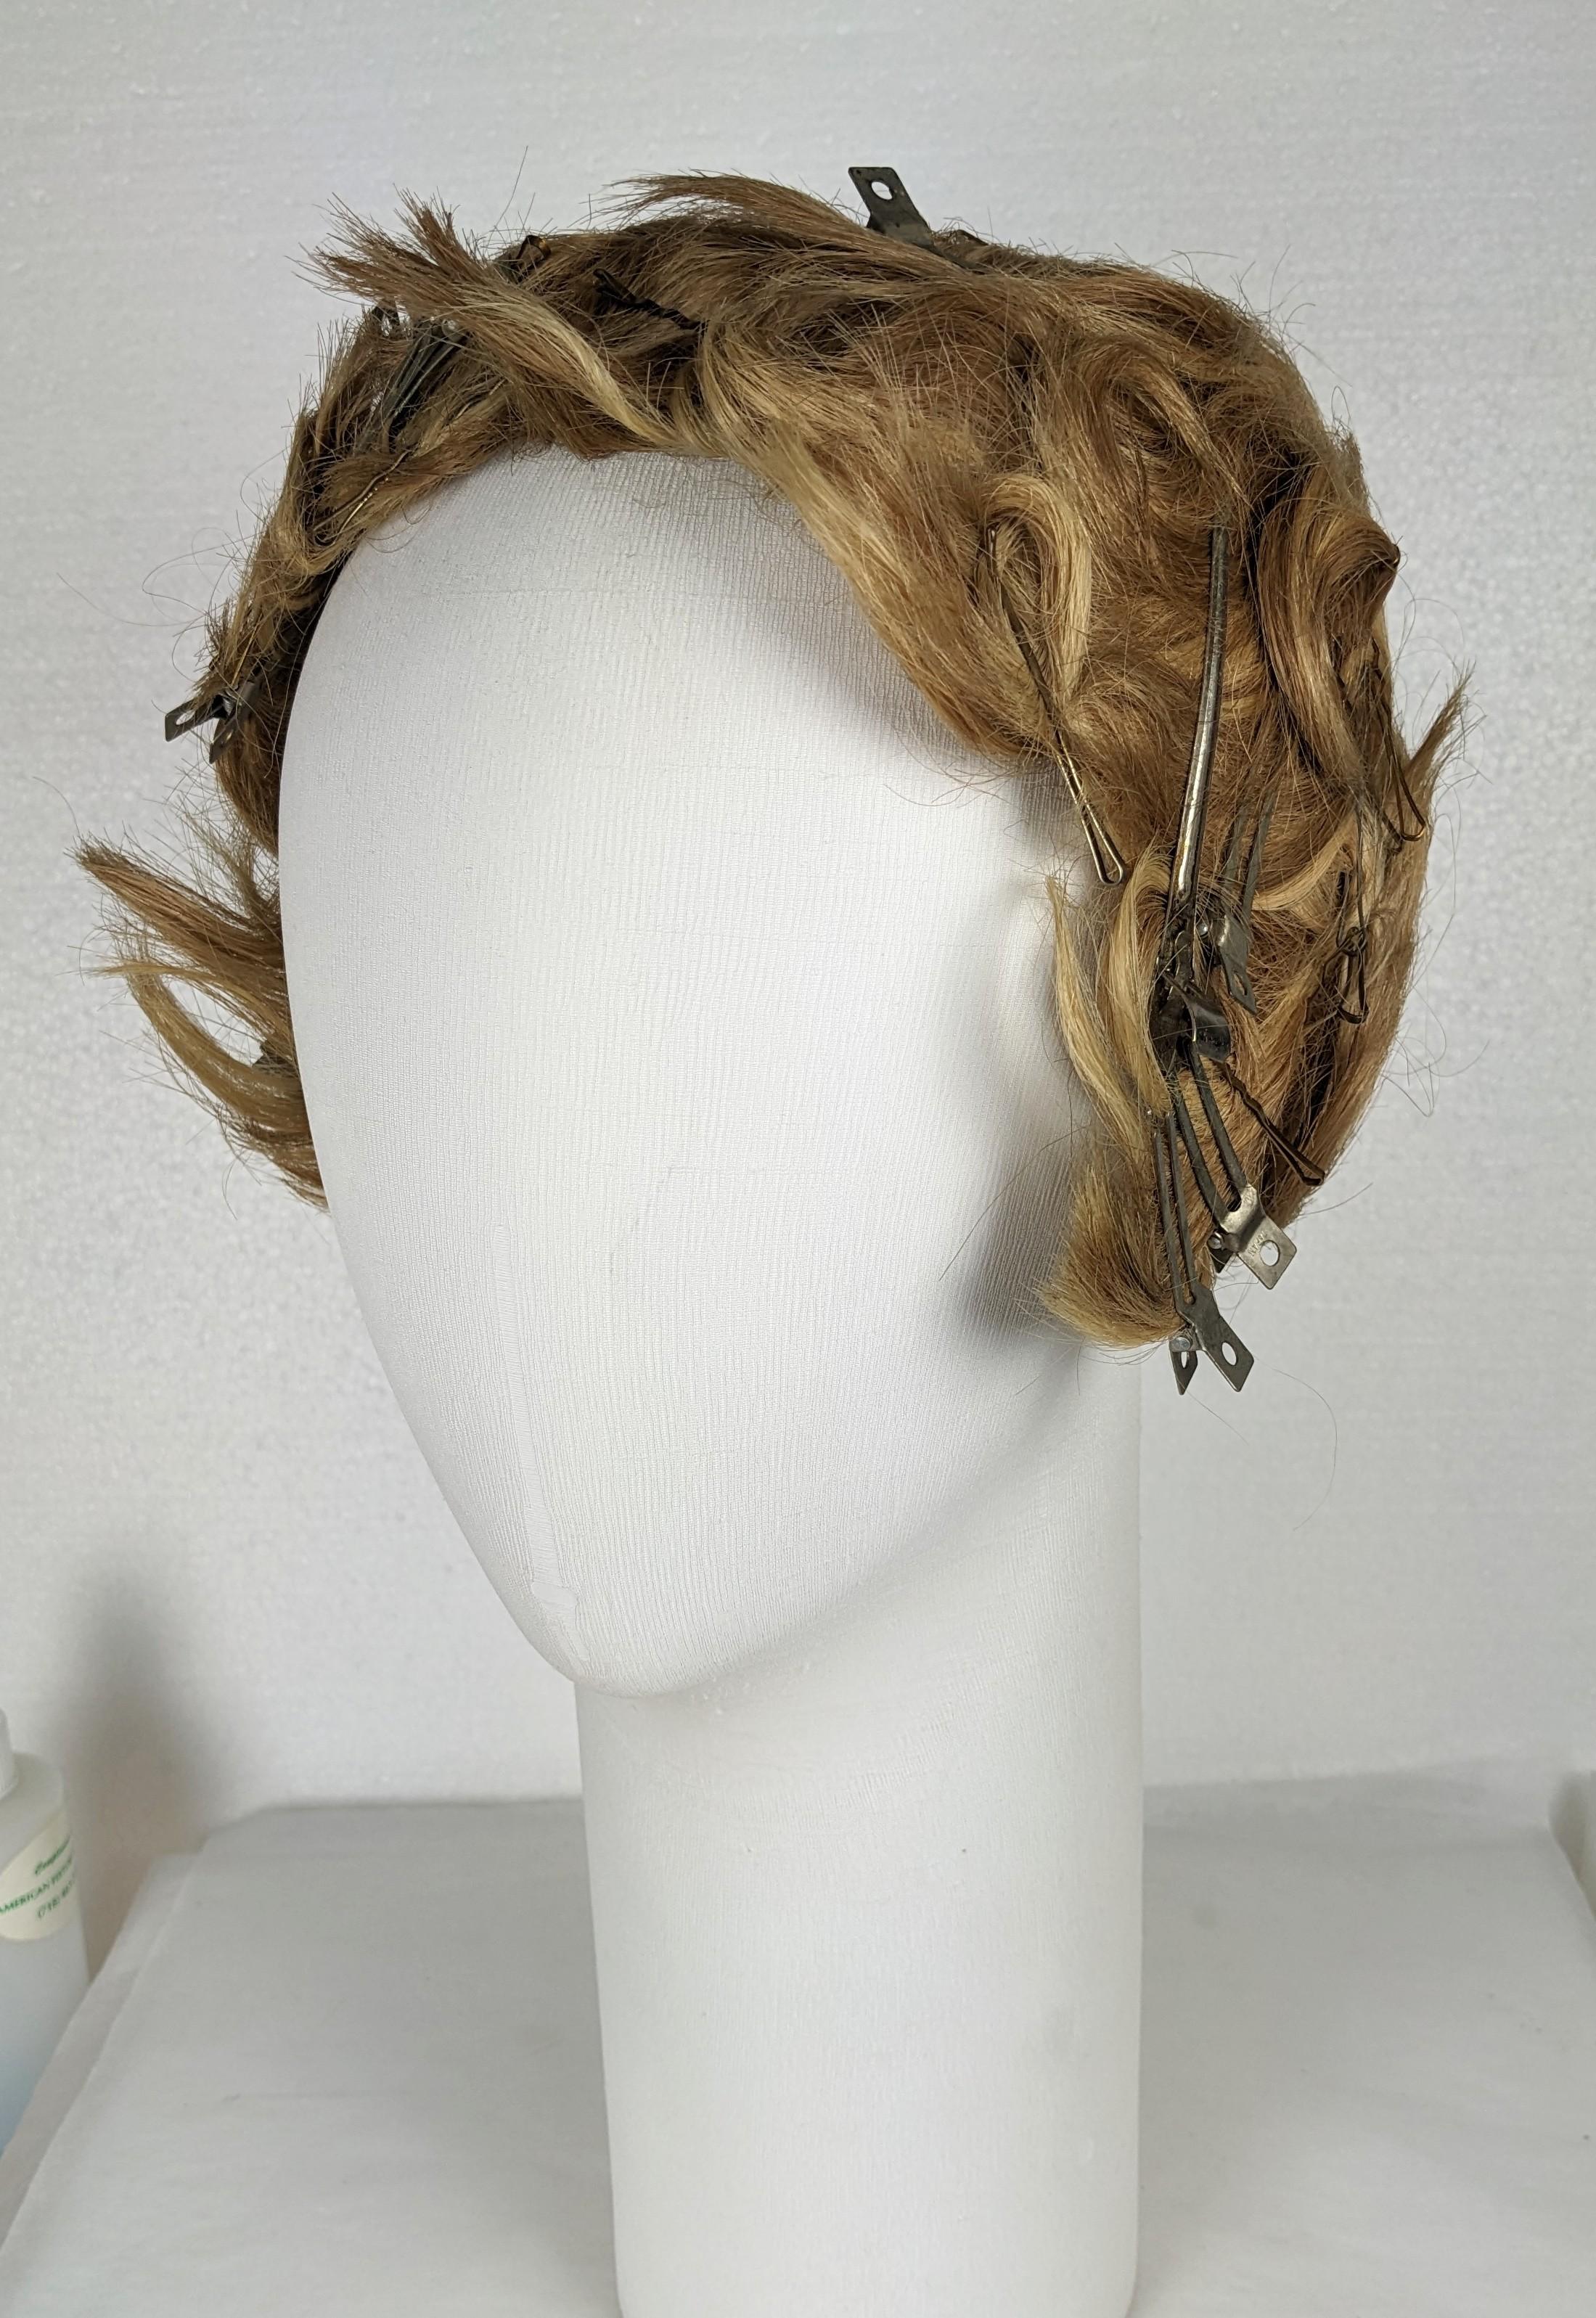 Amazing Charming Flapper wig from the 1920's. Soft waves and tight curls held by a myriad of bobby pins and clips a la Galliano, all sewn onto a net cap base labeled 